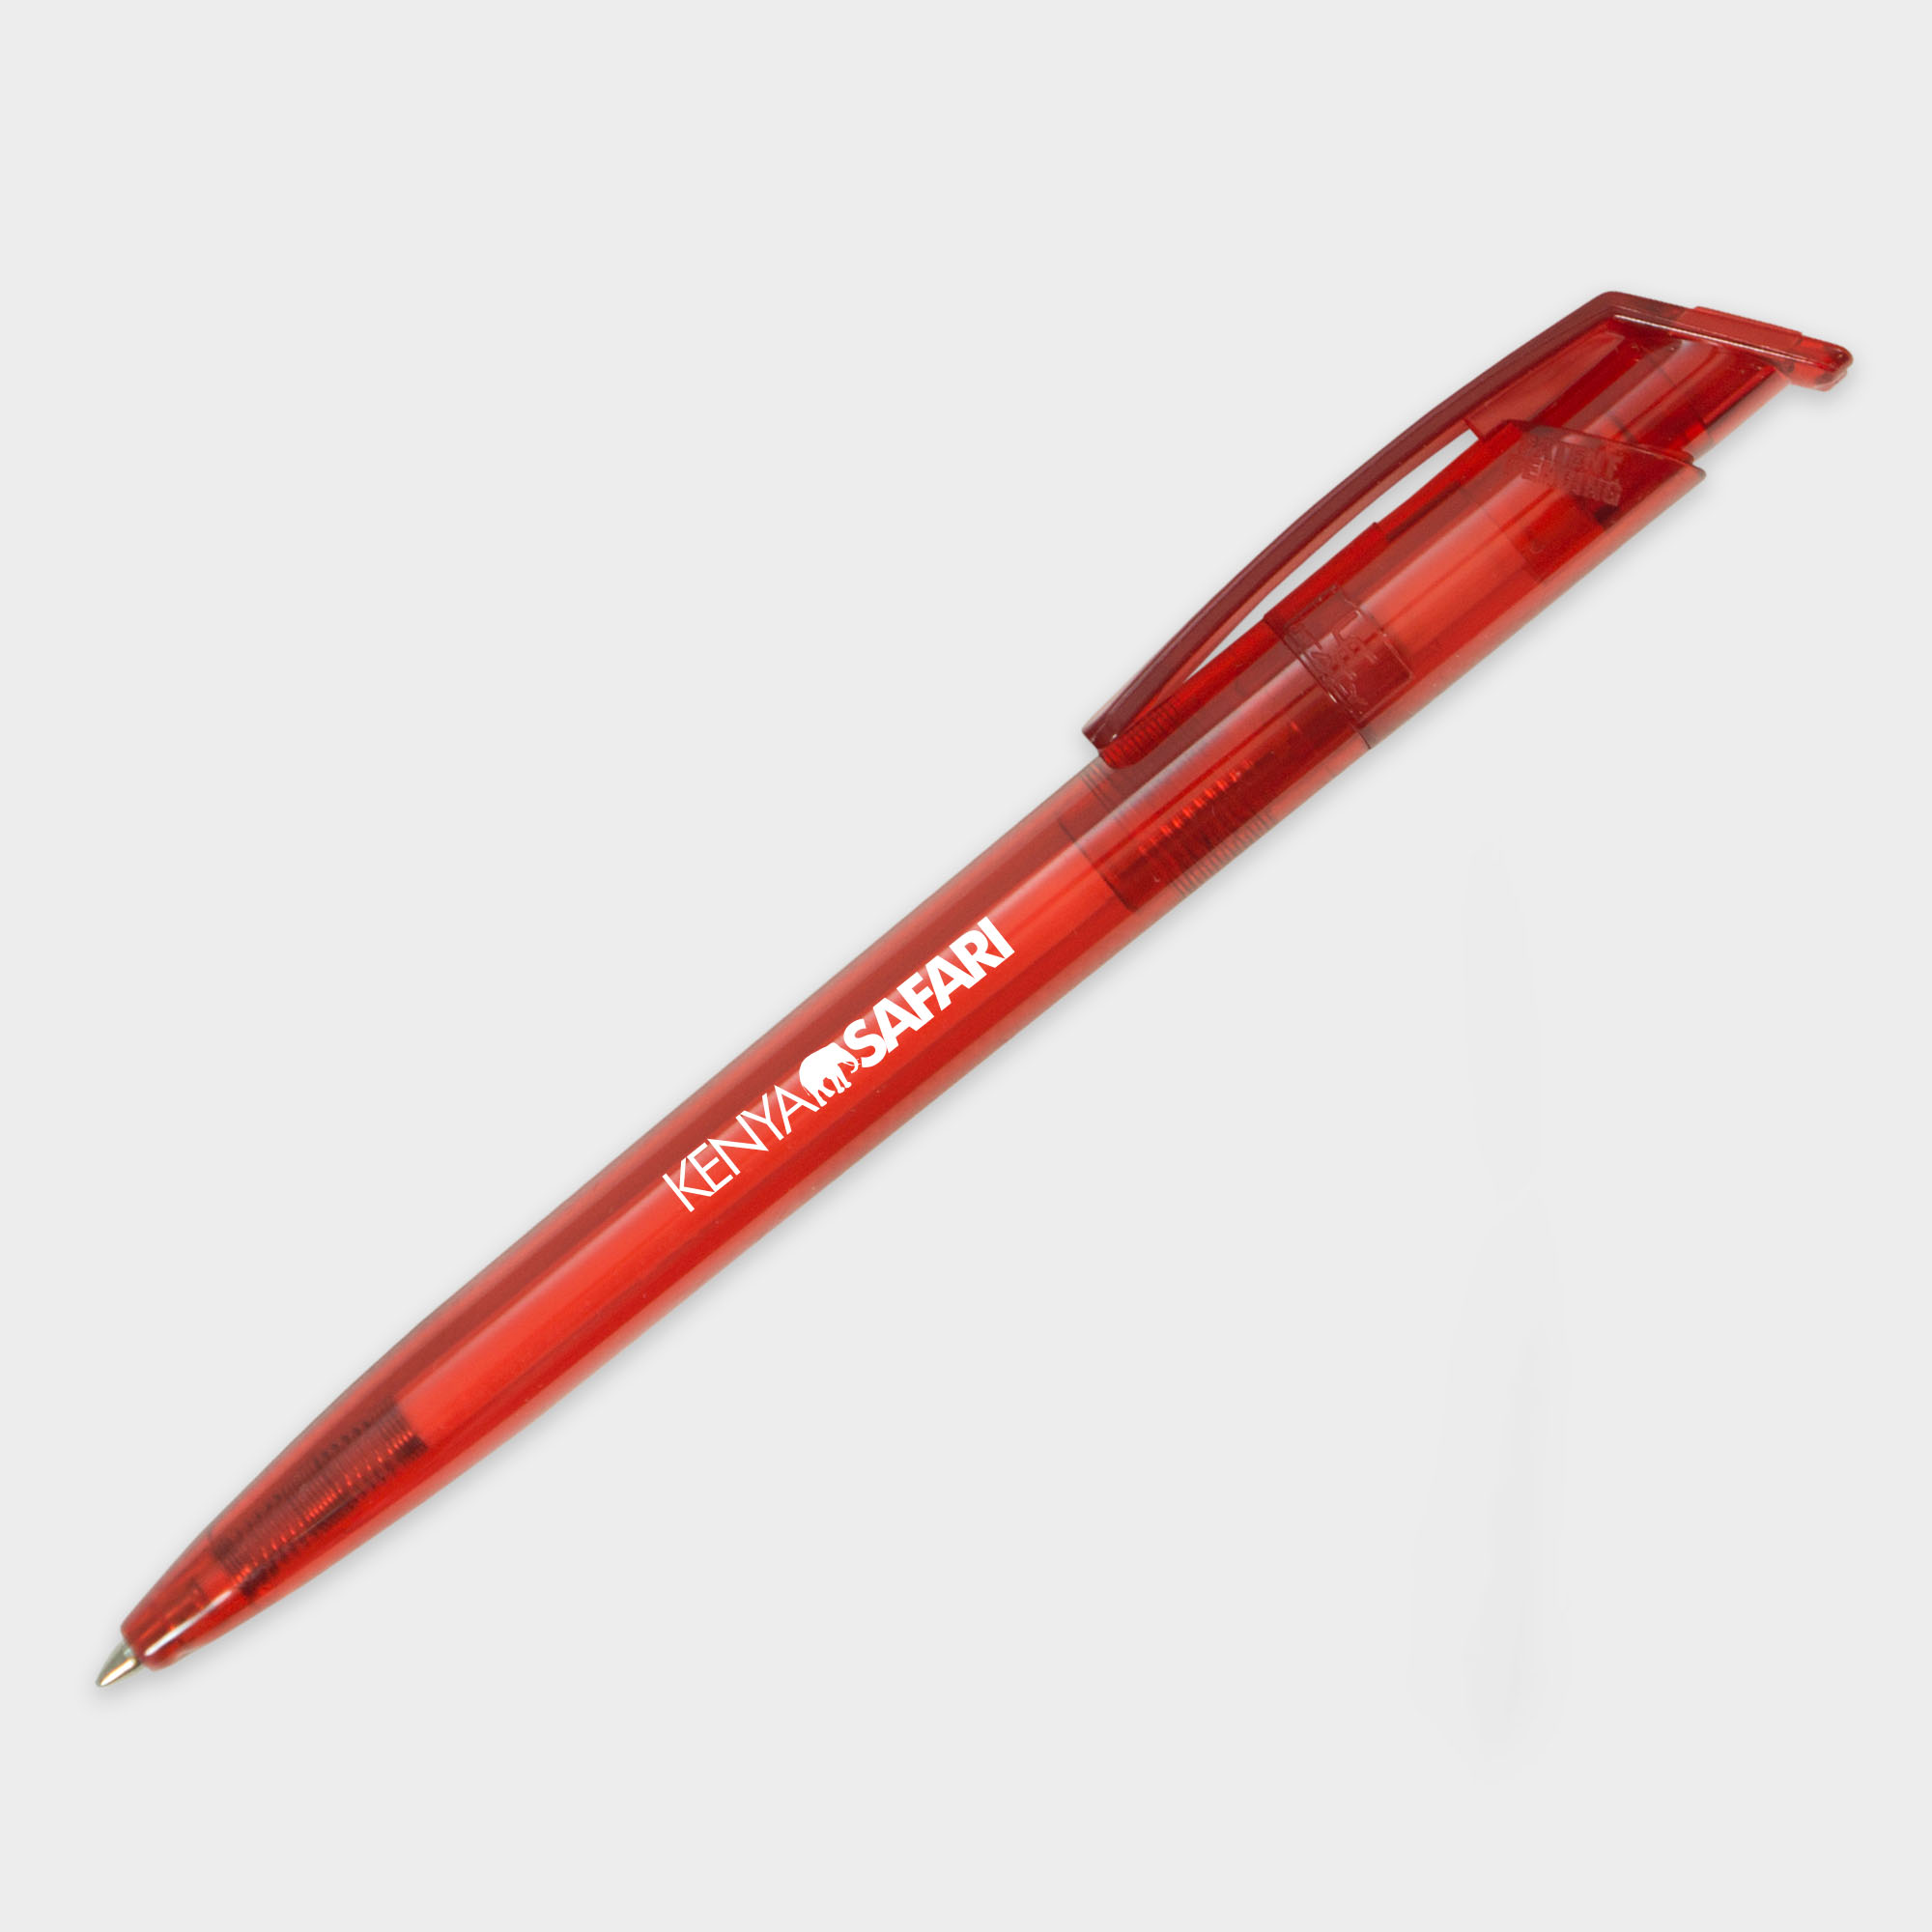 The Green & Good Litani Pen. An eco-friendly and high-quality pen made from recycled plastic bottles (rPET) with black ink refills and a frosted body. Made in the EU and available in a variety of colours. Red